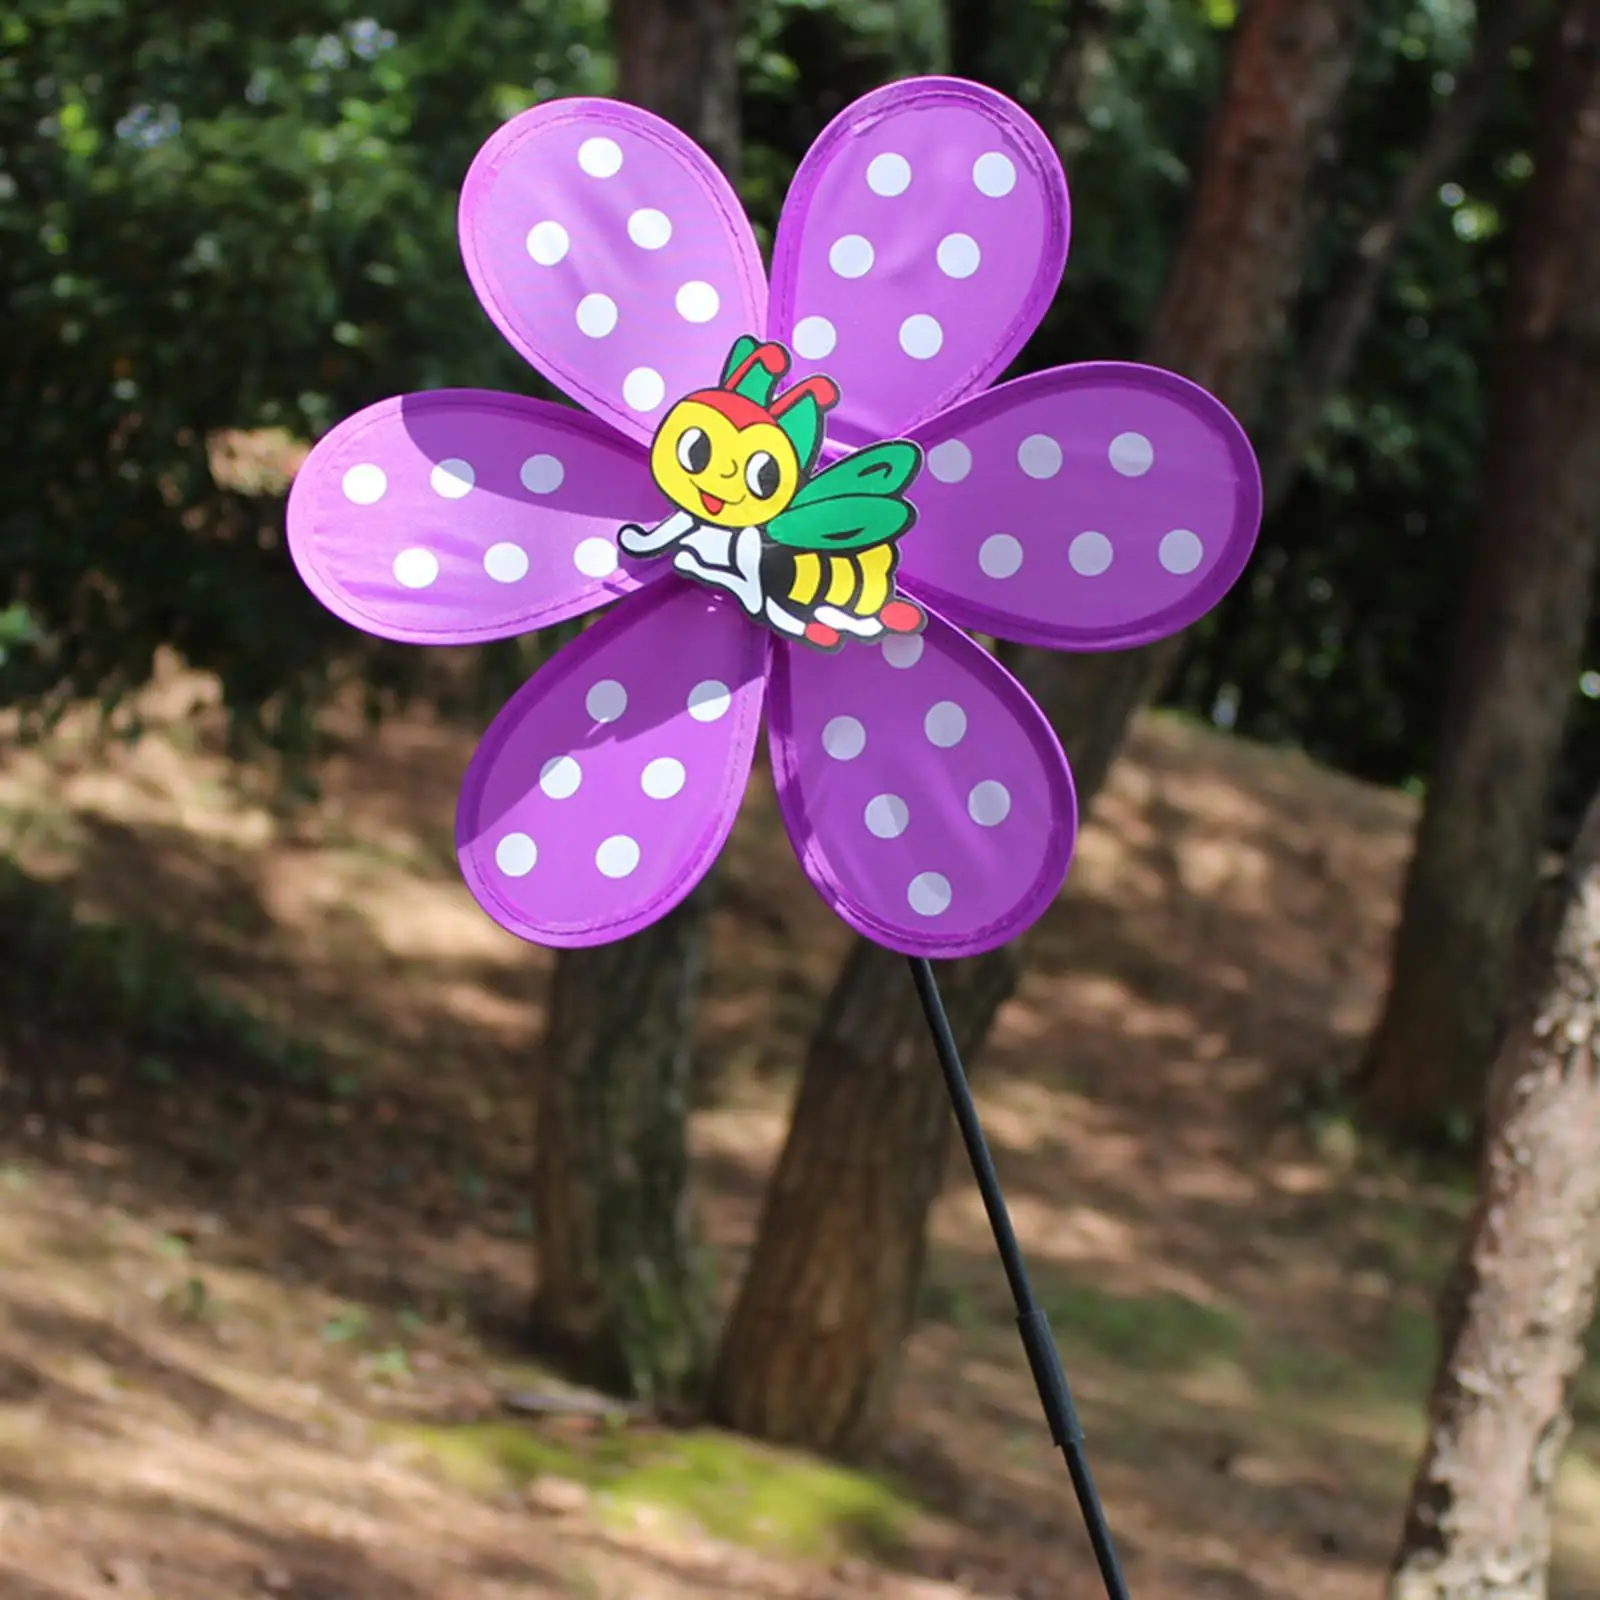 Garden Windmill/ Flower Whirl Decorative Gifts Ornaments Pinwheels/ for baby Toys 